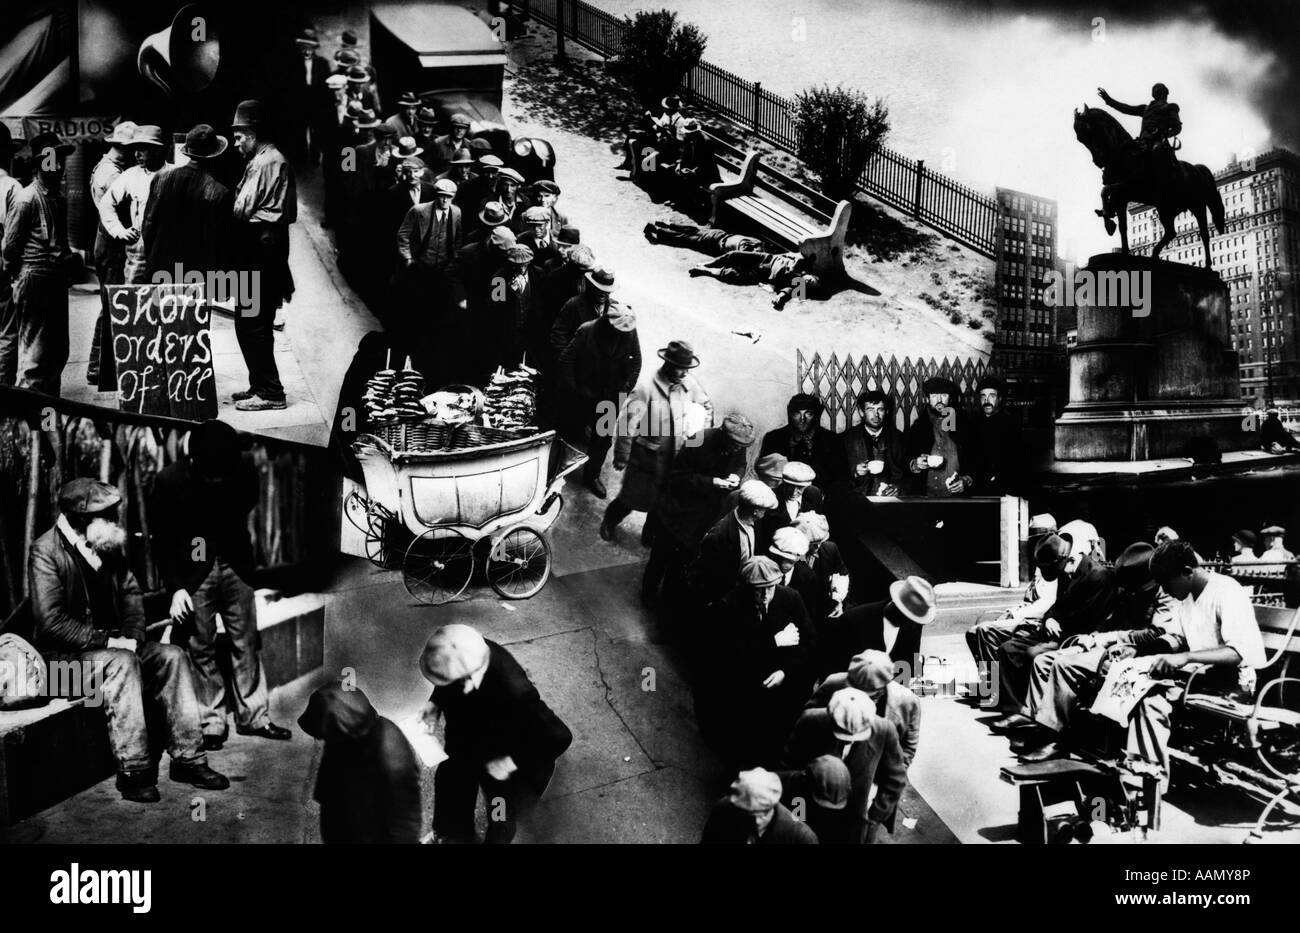 1930s PHOTO MONTAGE OF GREAT DEPRESSION INCLUDES BREAD LINE APPLE SELLERS UNEMPLOYMENT ECONOMIC HARDSHIP AND DECLINE Stock Photo